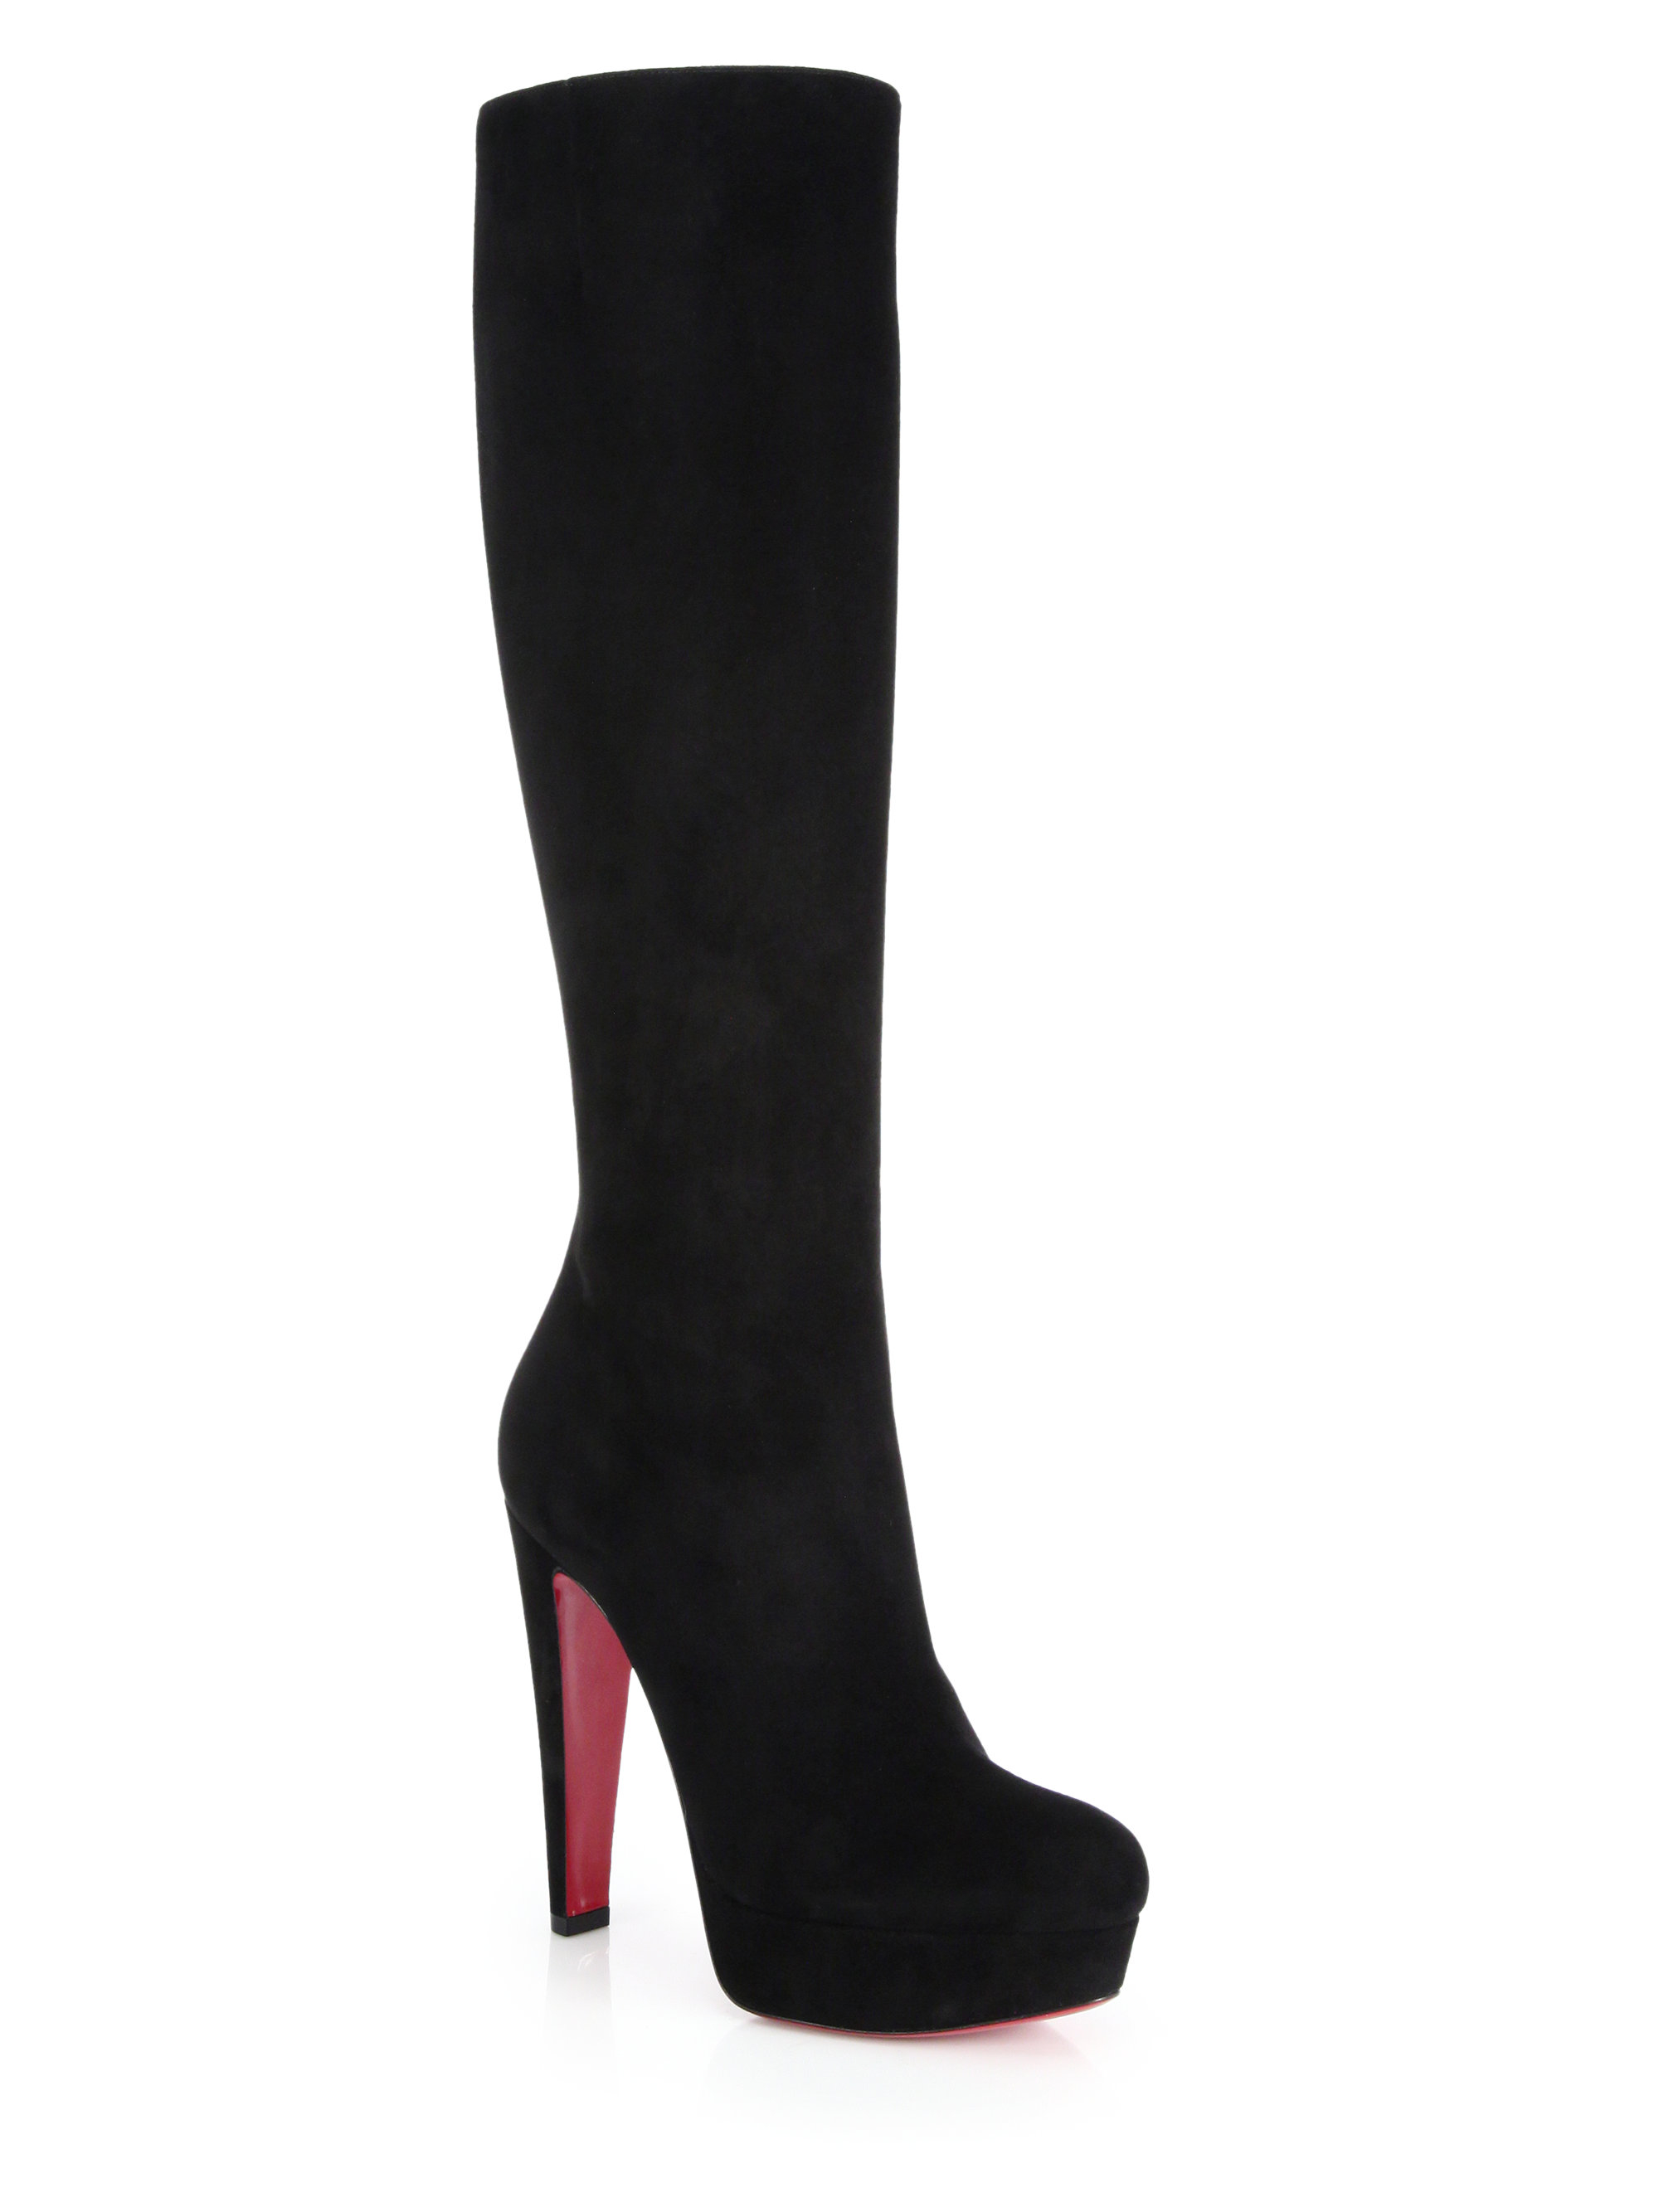 Lyst - Christian Louboutin Lady Suede Knee-high Platform Boots in Black